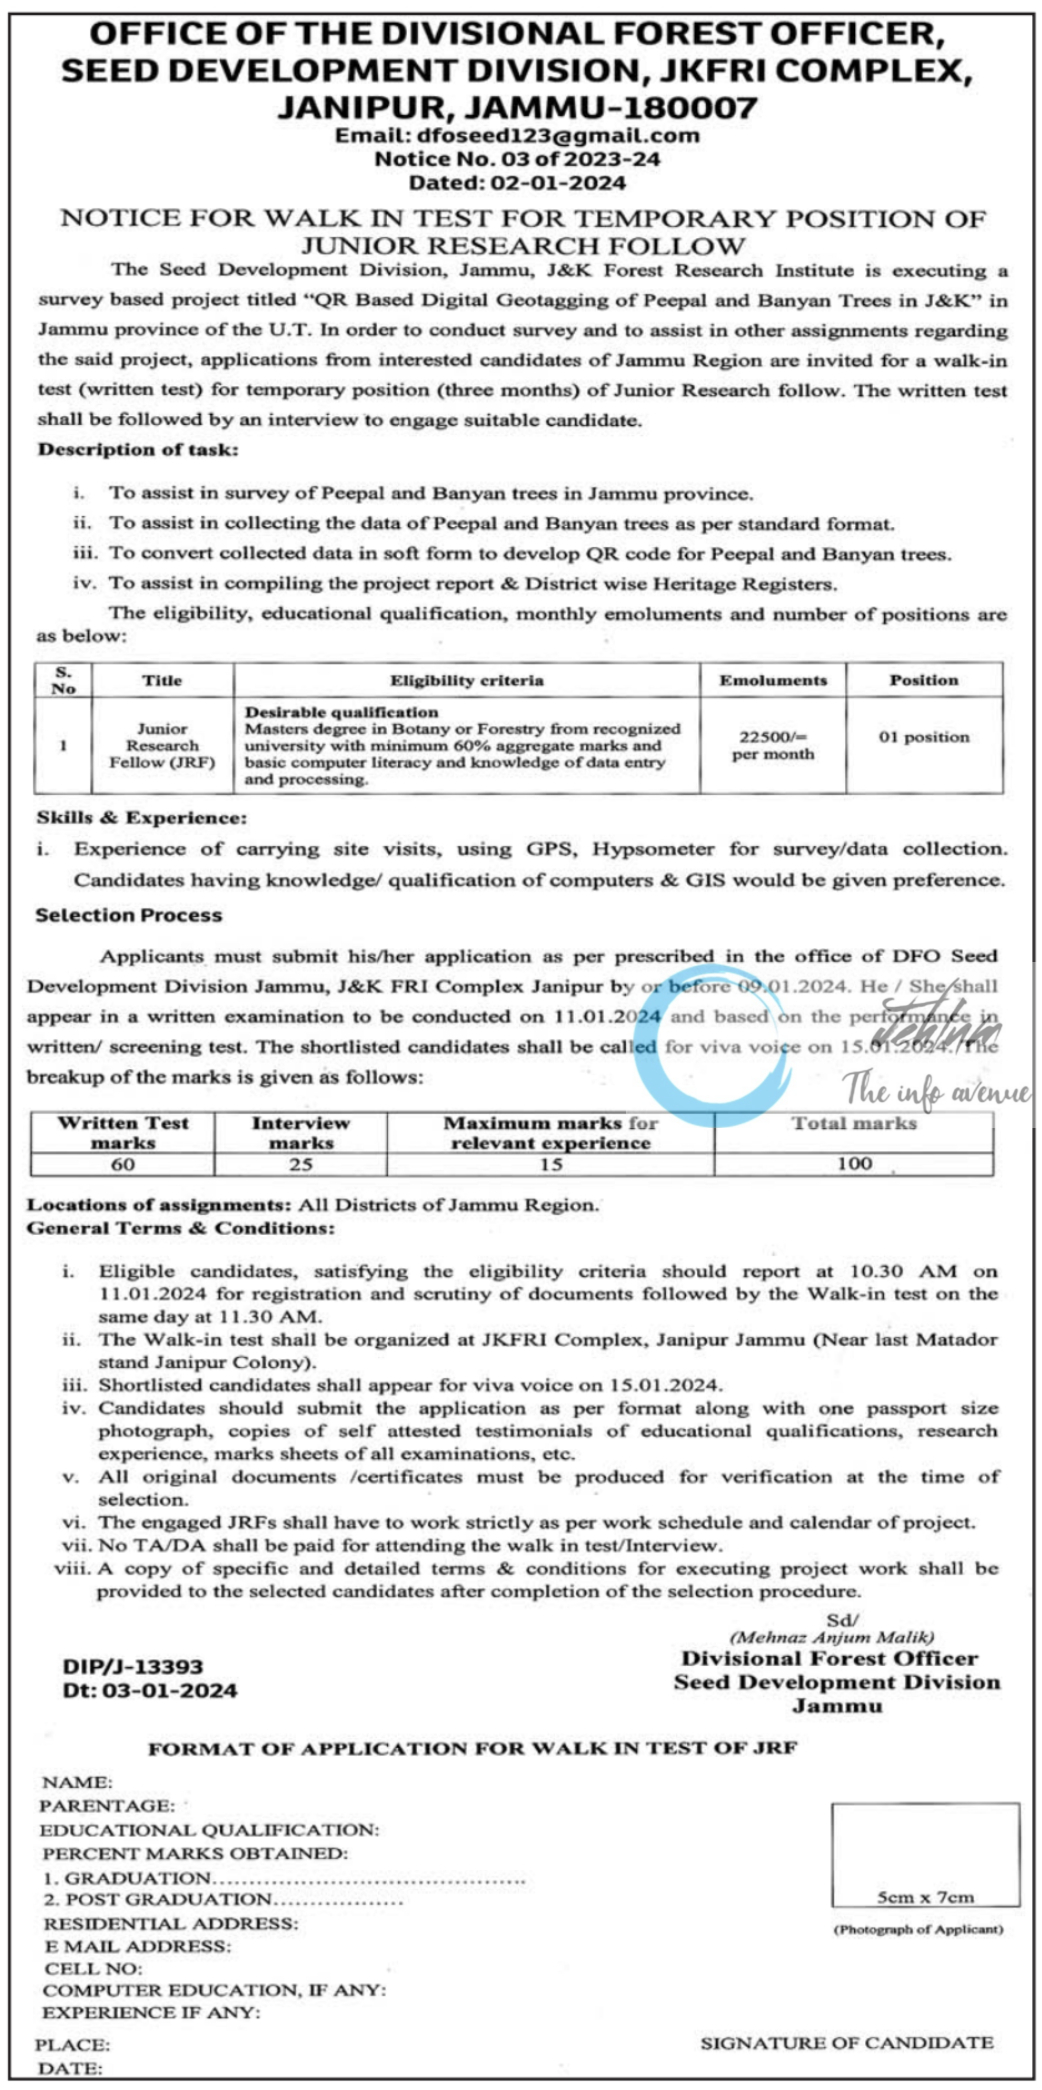 DIVISIONAL FOREST OFFICER SEED DEVELOPMENT DIVISION JAMMU JRF WALK IN TEST NOTICE NO 03 OF 2023-24